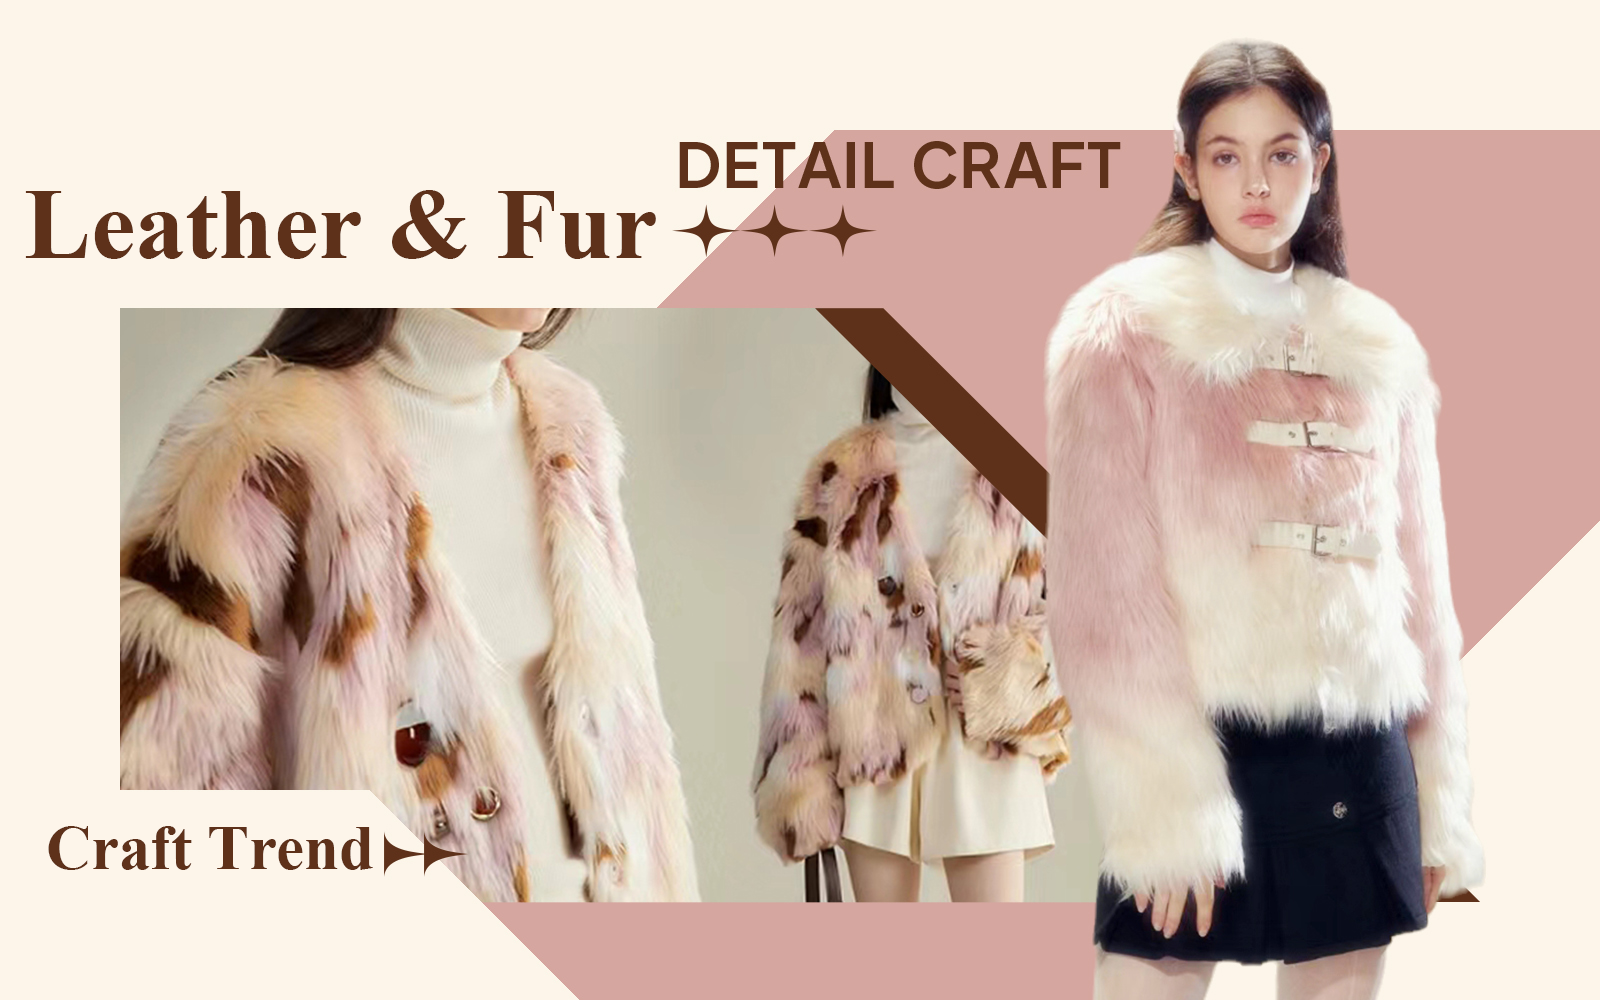 Colorful Dyeing -- The Detail & Craft Trend for Women's Fur Clothing